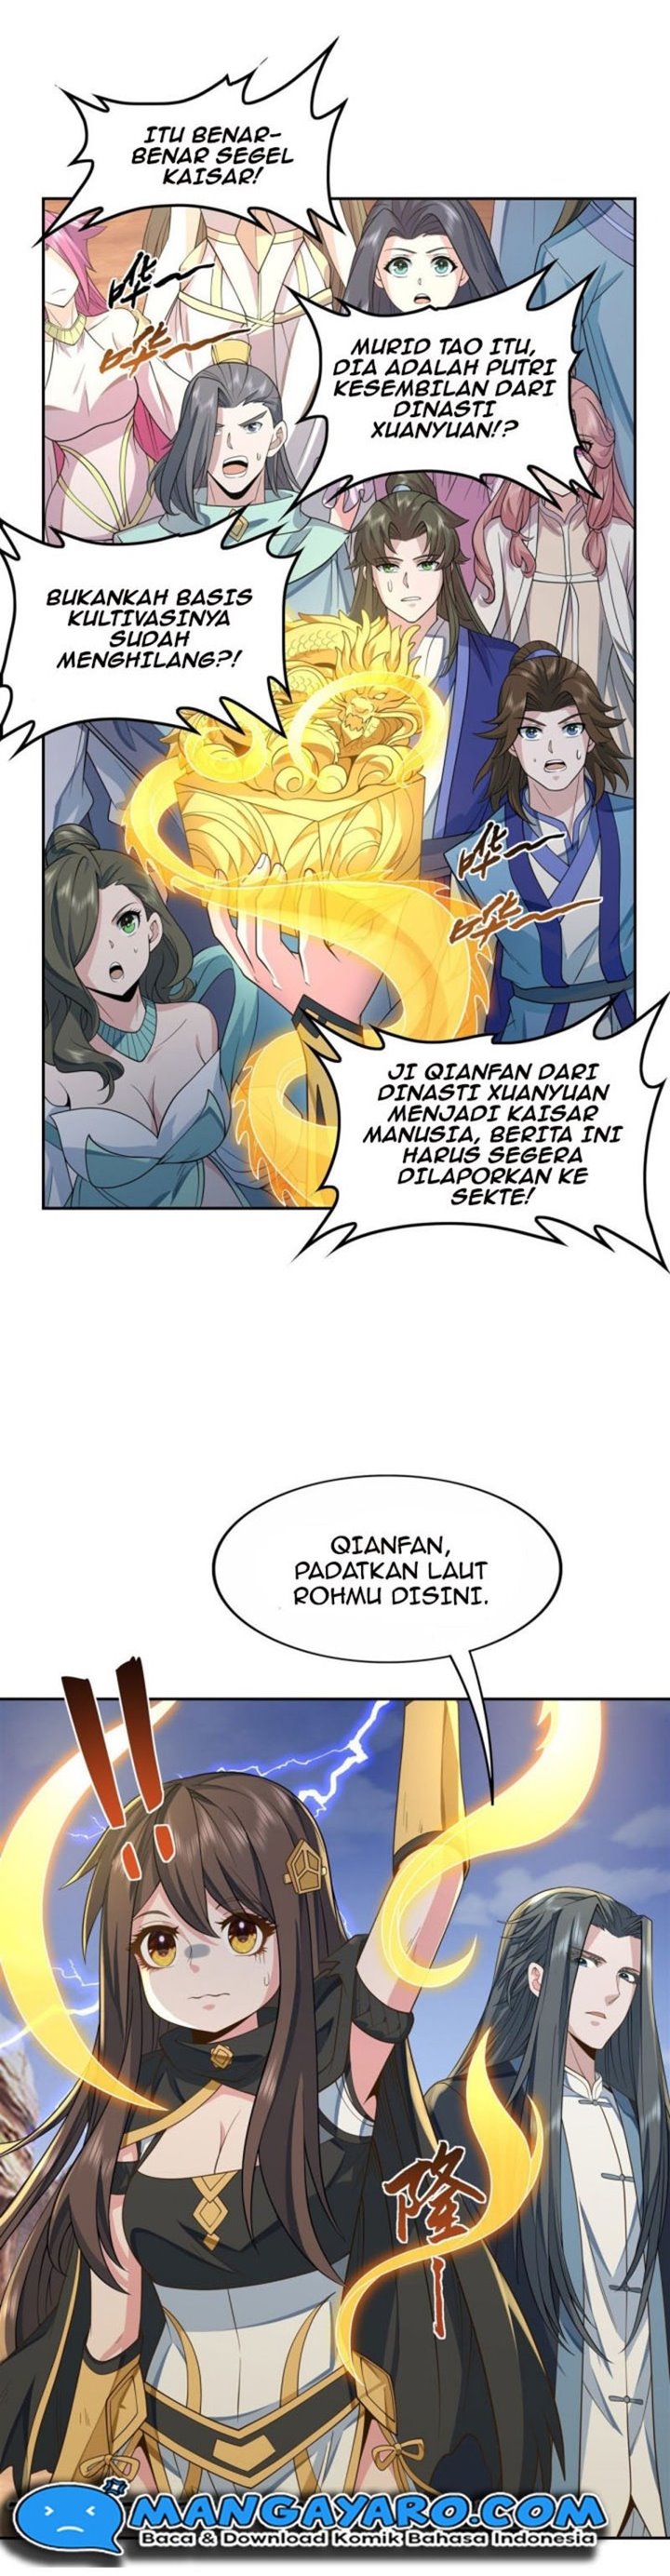 Dilarang COPAS - situs resmi www.mangacanblog.com - Komik my female apprentices are all big shots from the future 014 - chapter 14 15 Indonesia my female apprentices are all big shots from the future 014 - chapter 14 Terbaru 23|Baca Manga Komik Indonesia|Mangacan